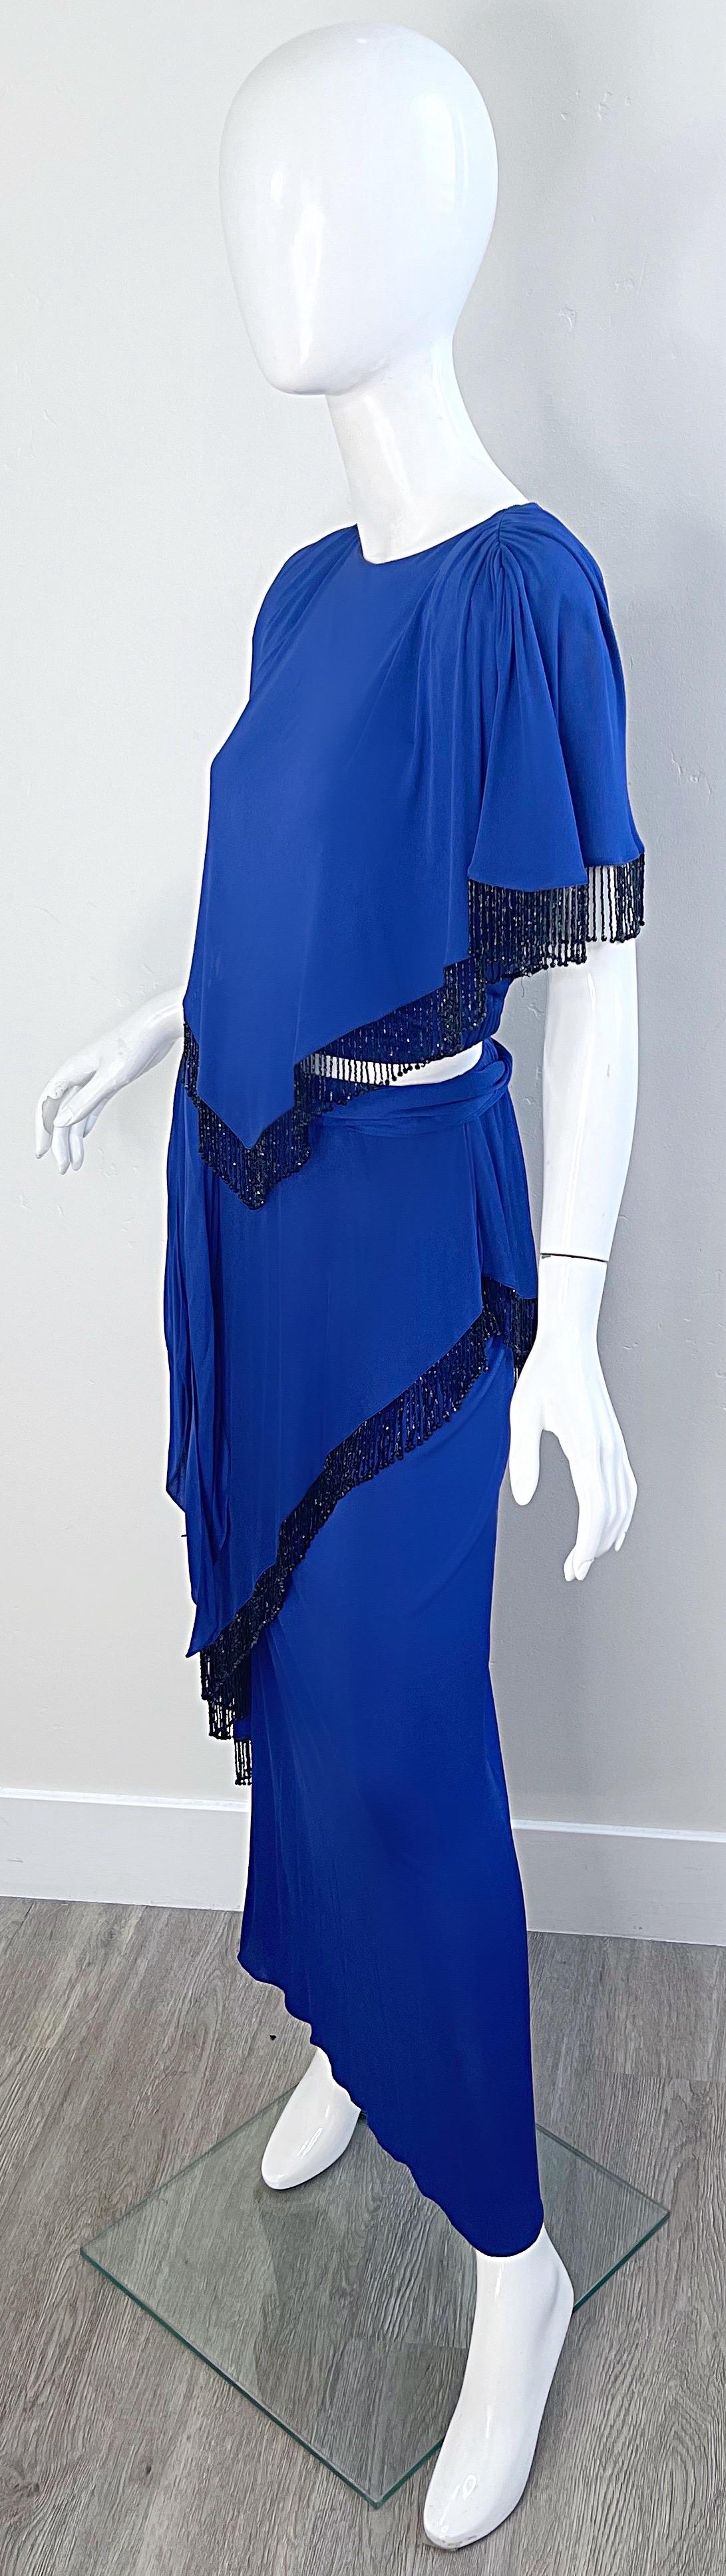 Holly’s Harp 1970s Royal Blue Silk Jersey Beaded 3 Piece Vintage 70s Ensemble For Sale 4